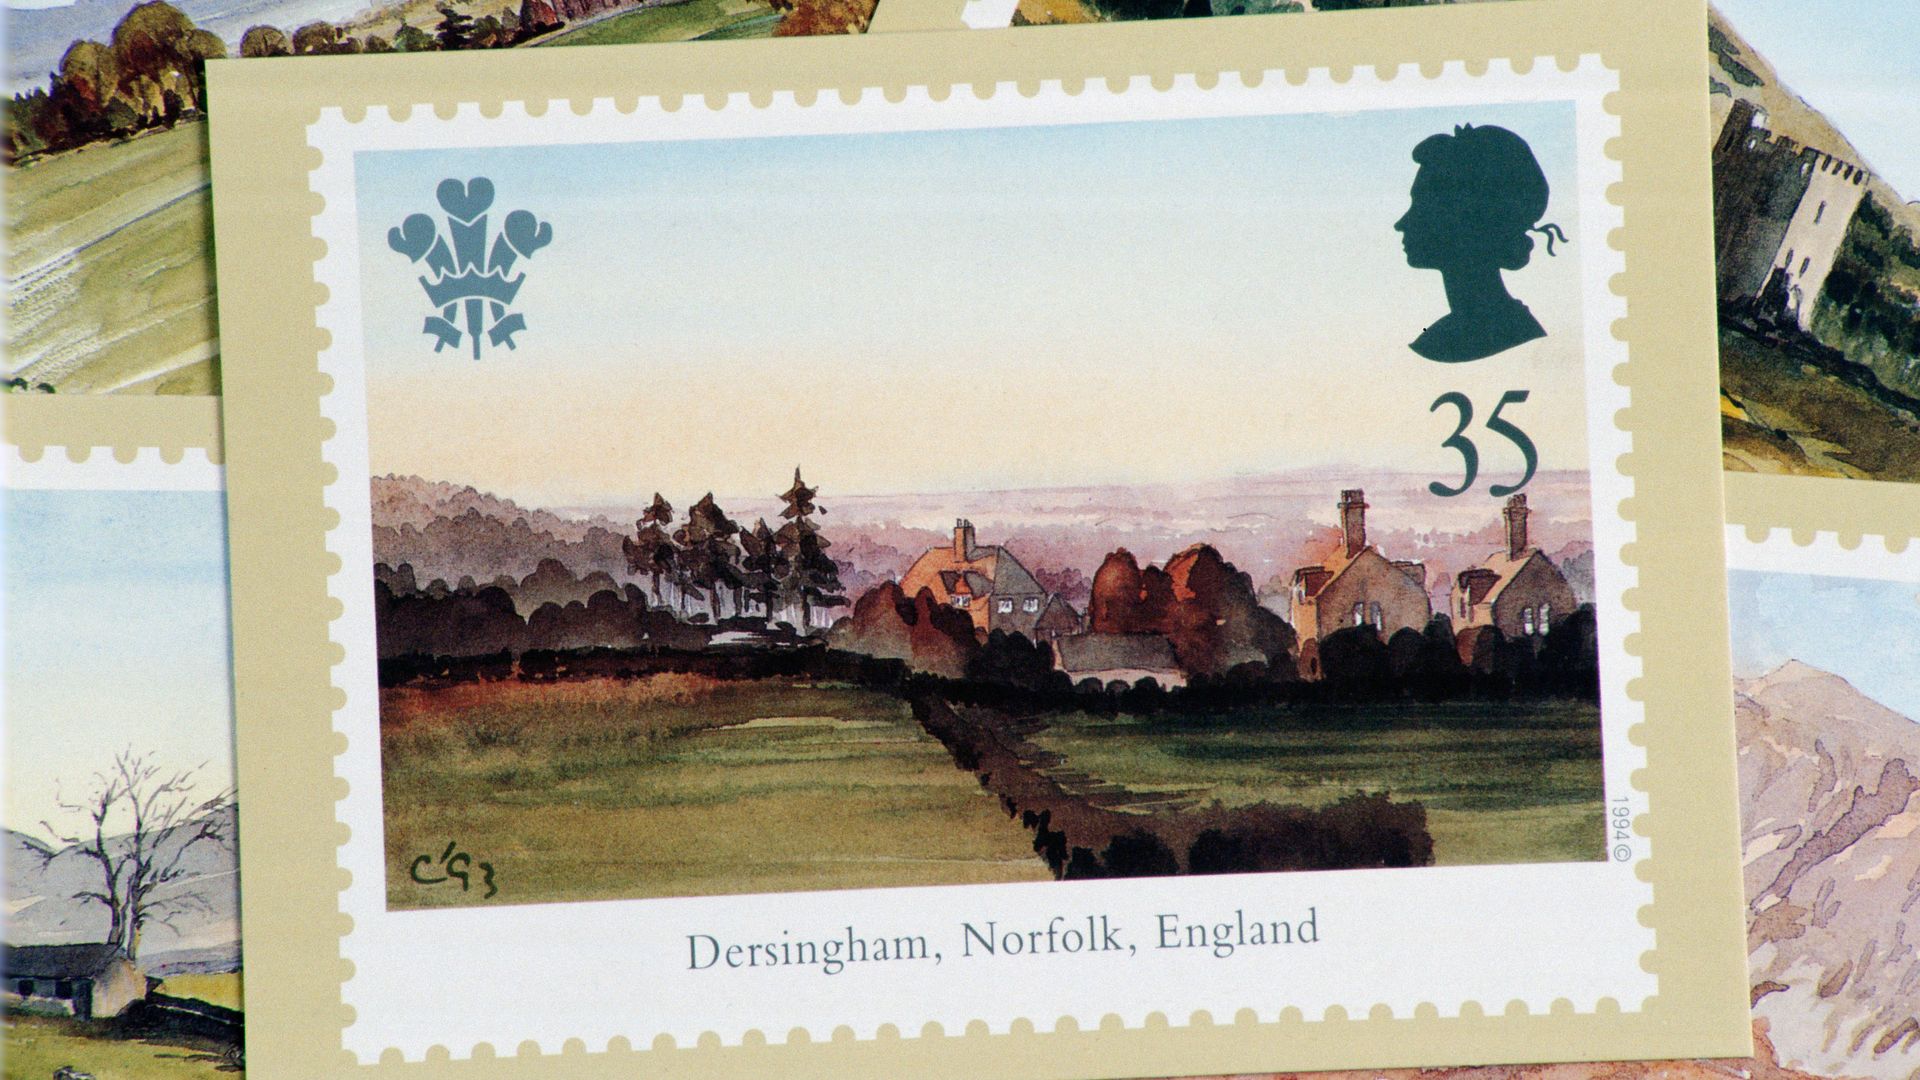 A set of commemorative stamps featuring King Charles's painting of Dersingham